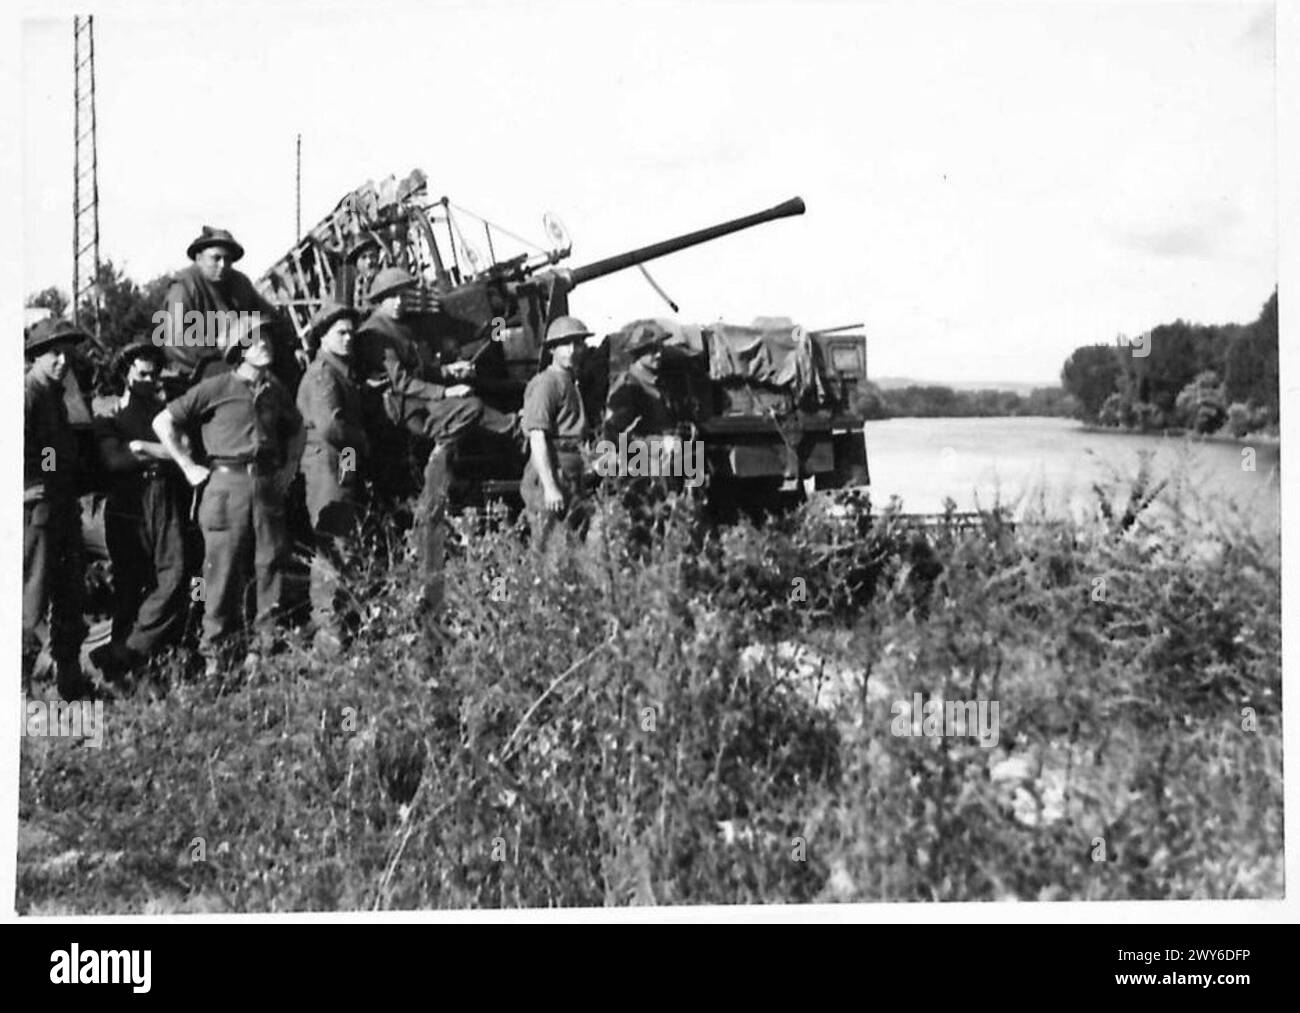 BUILDING A CLASS 40 FLOATING BAILEY BRIDGE OVER THE SEINE - An SP Bofor gun is ready to defend as the work of bridging goes ahead. Changing over crews on the 'Elmstead of Kent'. Most of the 119 LAA Regt. come from Kent. , British Army, 21st Army Group Stock Photo